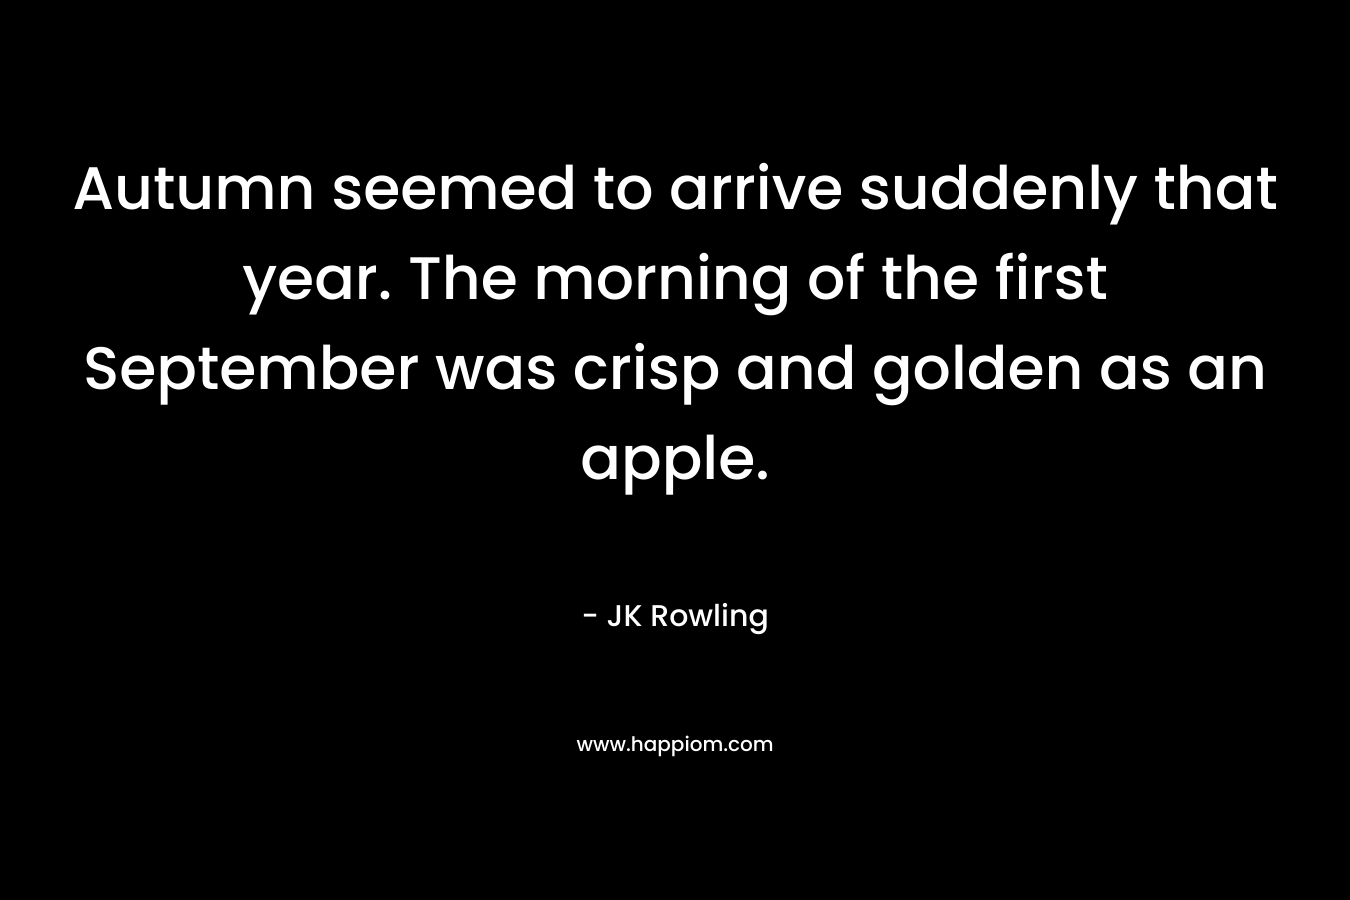 Autumn seemed to arrive suddenly that year. The morning of the first September was crisp and golden as an apple.